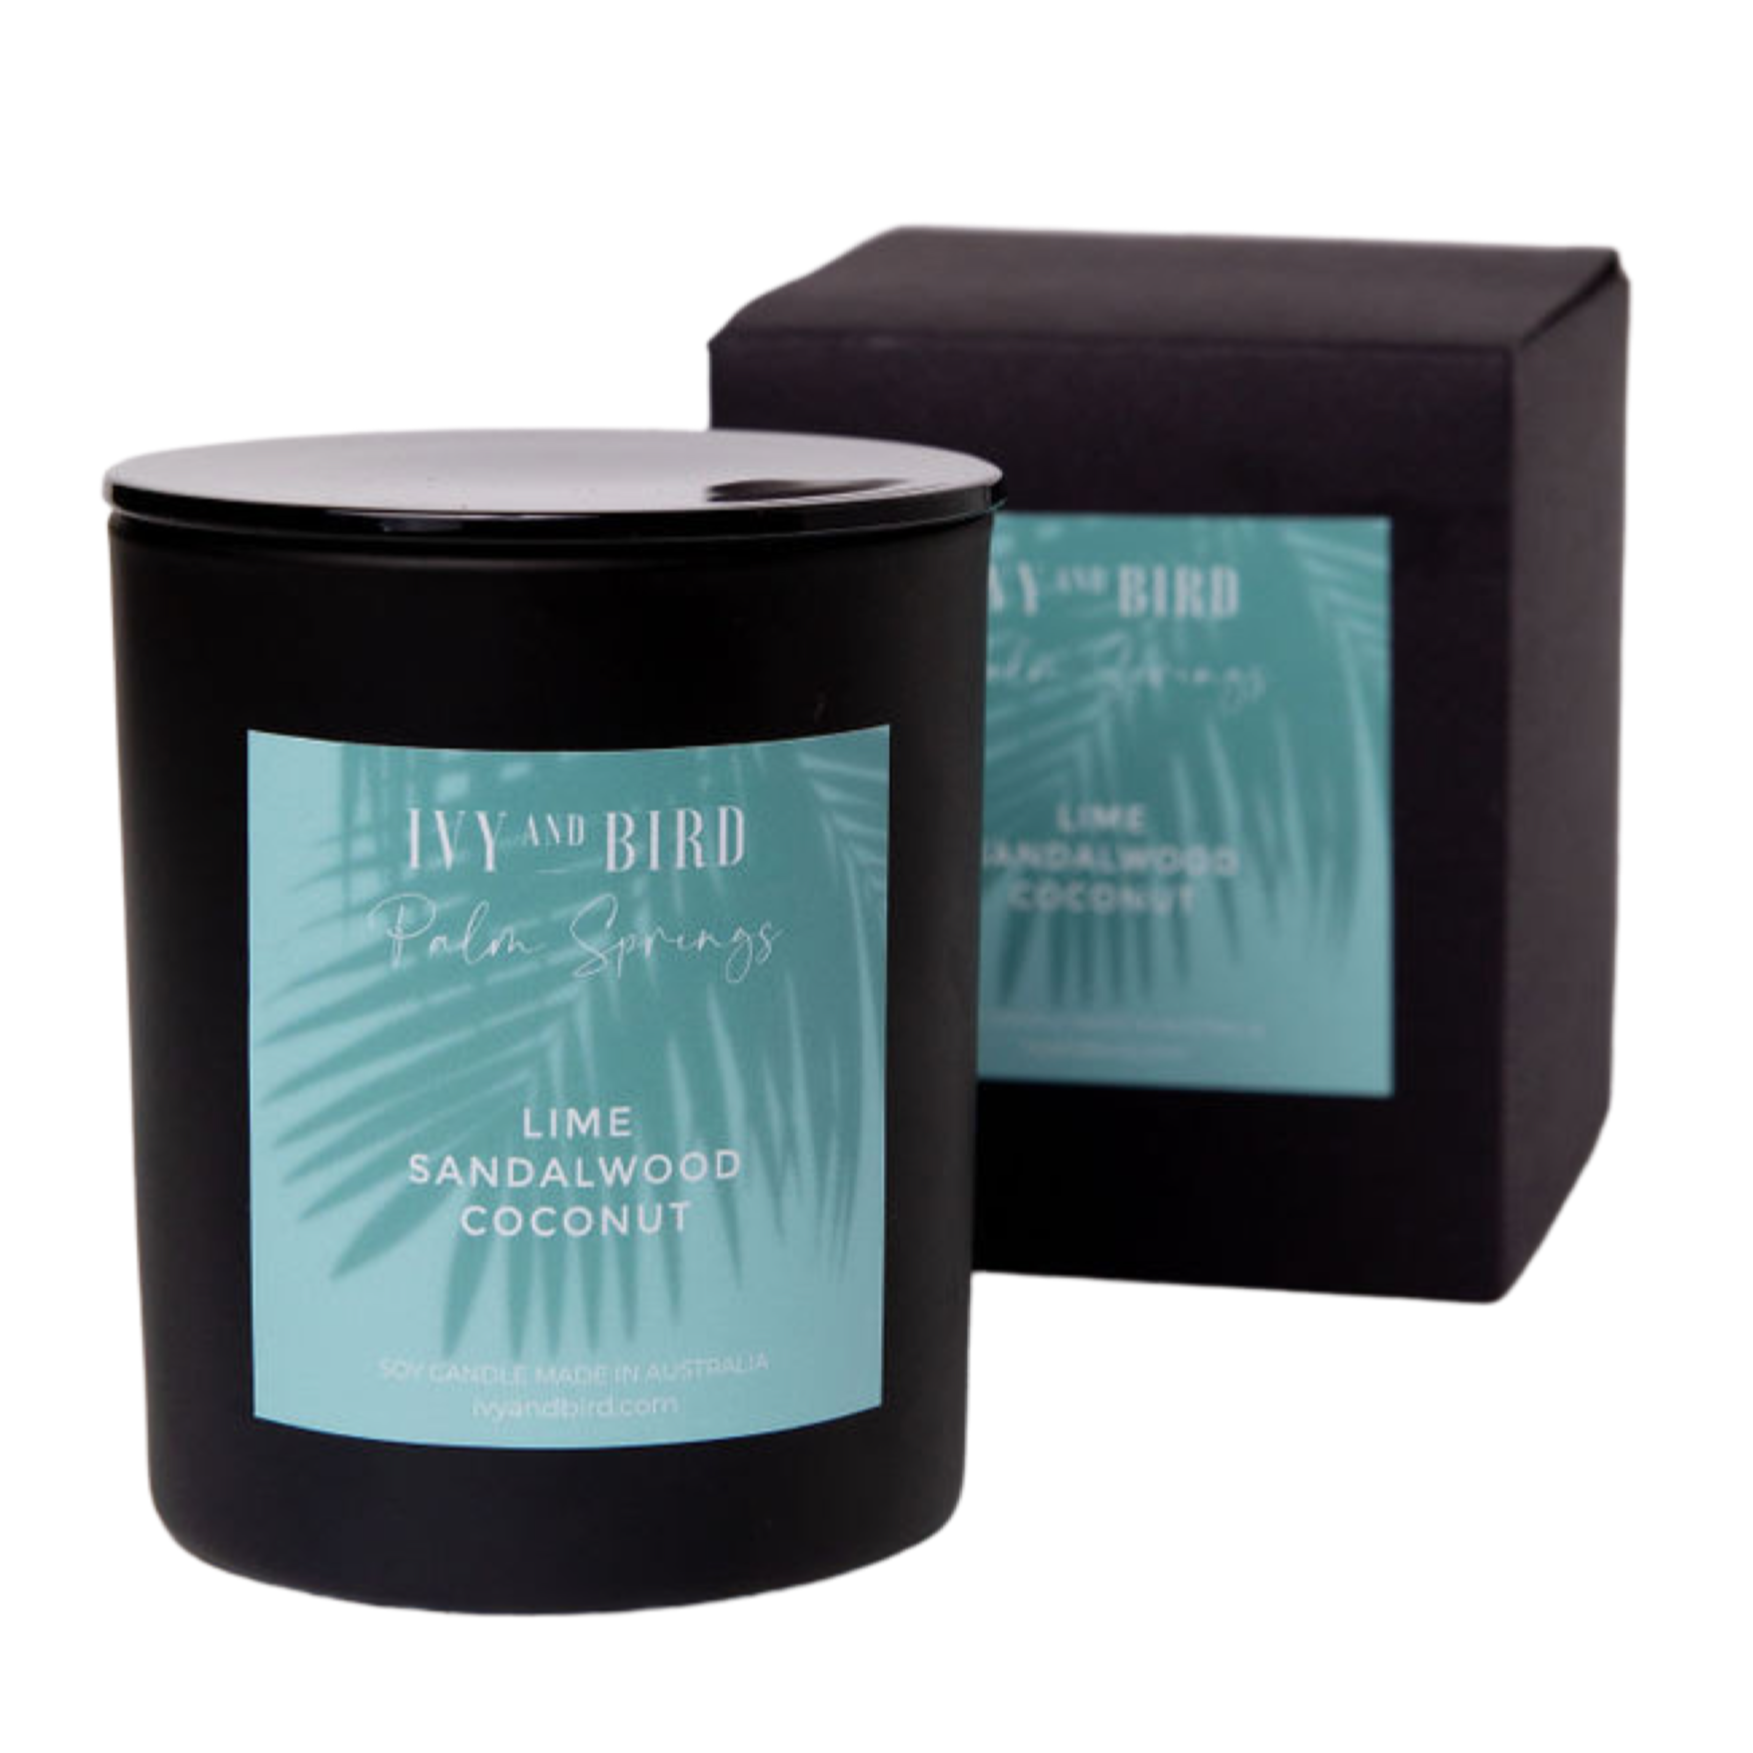 LIME SANDALWOOD & COCONUT SOY CANDLE - PALM SPRINGS